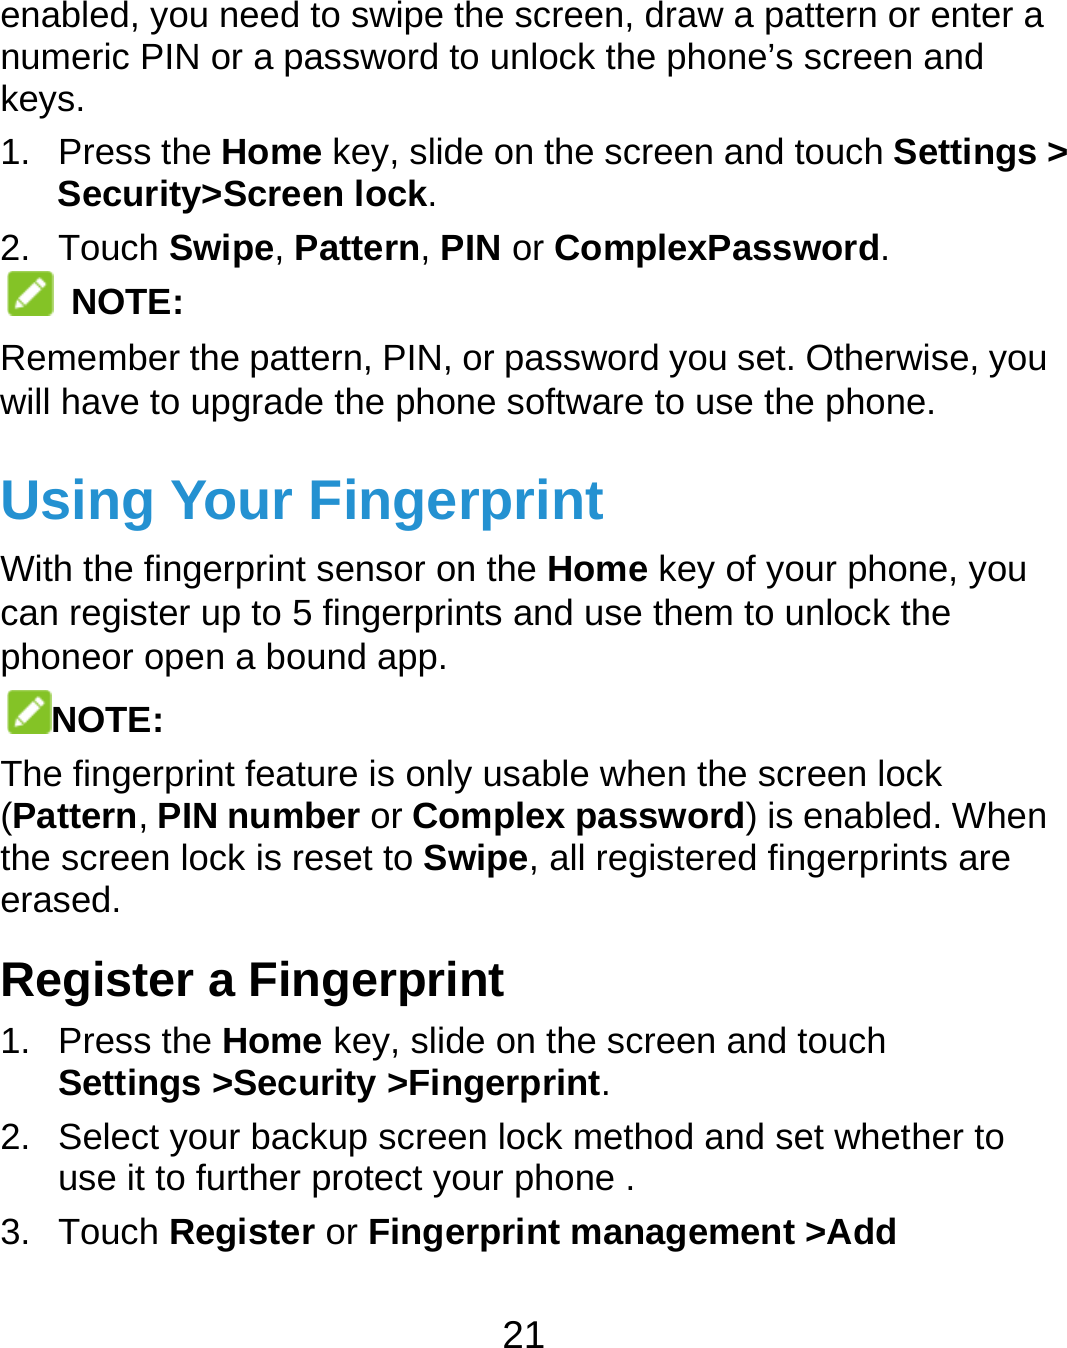  21 enabled, you need to swipe the screen, draw a pattern or enter a numeric PIN or a password to unlock the phone’s screen and keys. 1. Press the Home key, slide on the screen and touch Settings &gt; Security&gt;Screen lock. 2. Touch Swipe, Pattern, PIN or ComplexPassword.  NOTE: Remember the pattern, PIN, or password you set. Otherwise, you will have to upgrade the phone software to use the phone.   Using Your Fingerprint With the fingerprint sensor on the Home key of your phone, you can register up to 5 fingerprints and use them to unlock the phoneor open a bound app. NOTE: The fingerprint feature is only usable when the screen lock (Pattern, PIN number or Complex password) is enabled. When the screen lock is reset to Swipe, all registered fingerprints are erased. Register a Fingerprint 1. Press the Home key, slide on the screen and touch Settings &gt;Security &gt;Fingerprint. 2.  Select your backup screen lock method and set whether to use it to further protect your phone . 3. Touch Register or Fingerprint management &gt;Add 